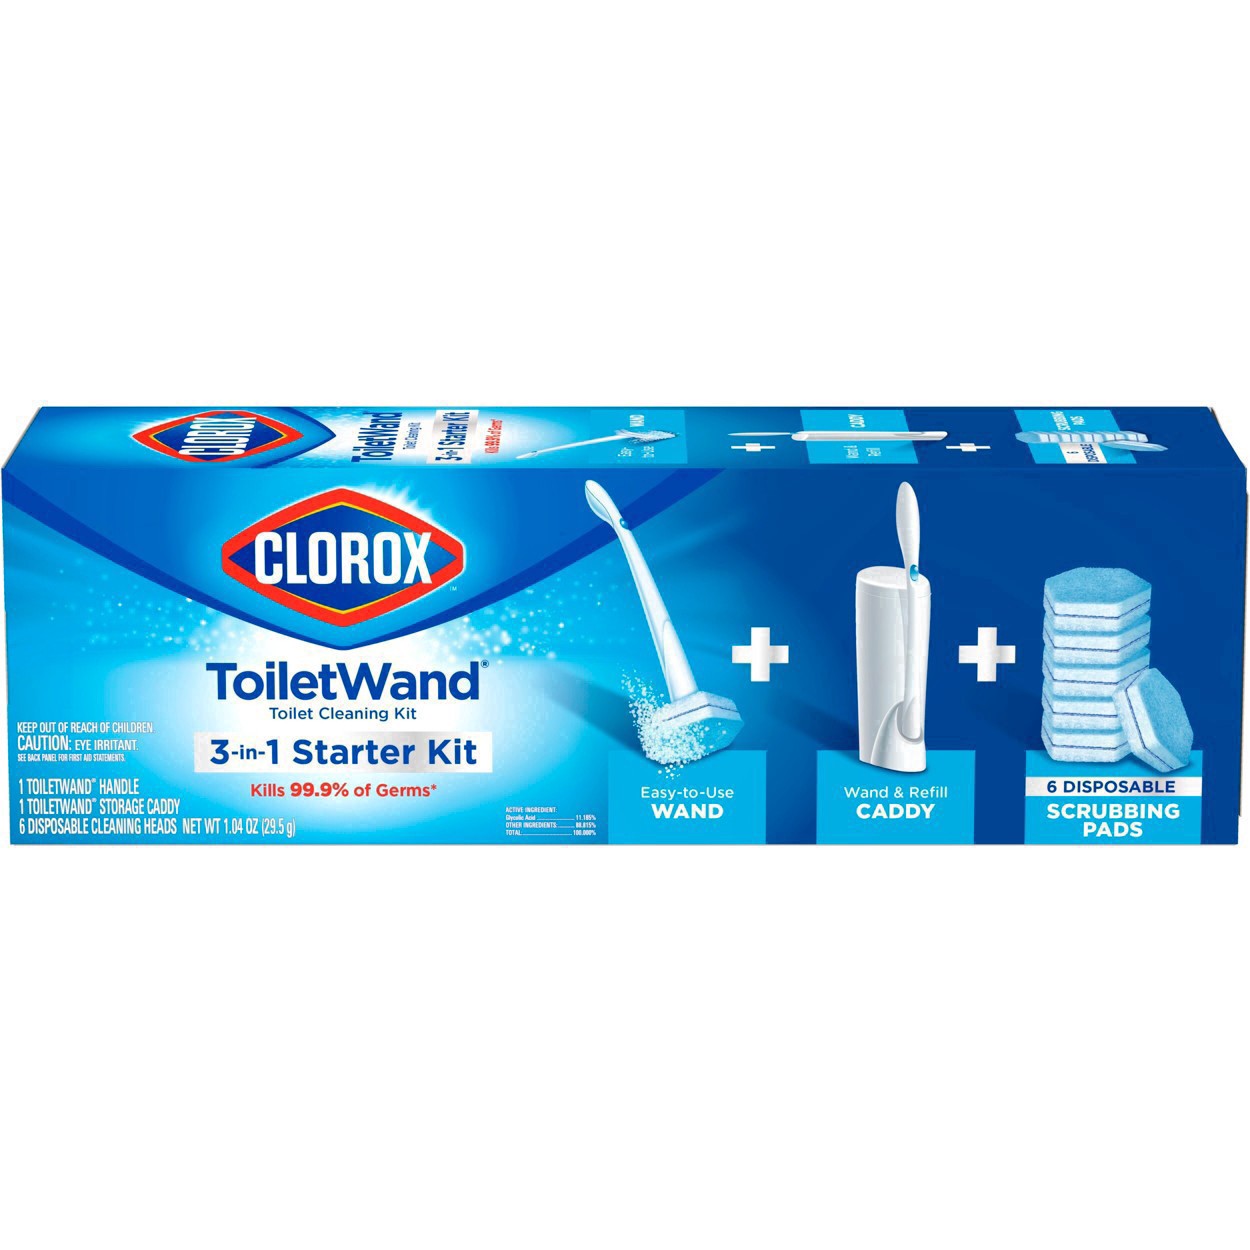 slide 75 of 176, Clorox Toilet Wand 3-in-1 Starter Toliet Cleaning Kit, 1 ct